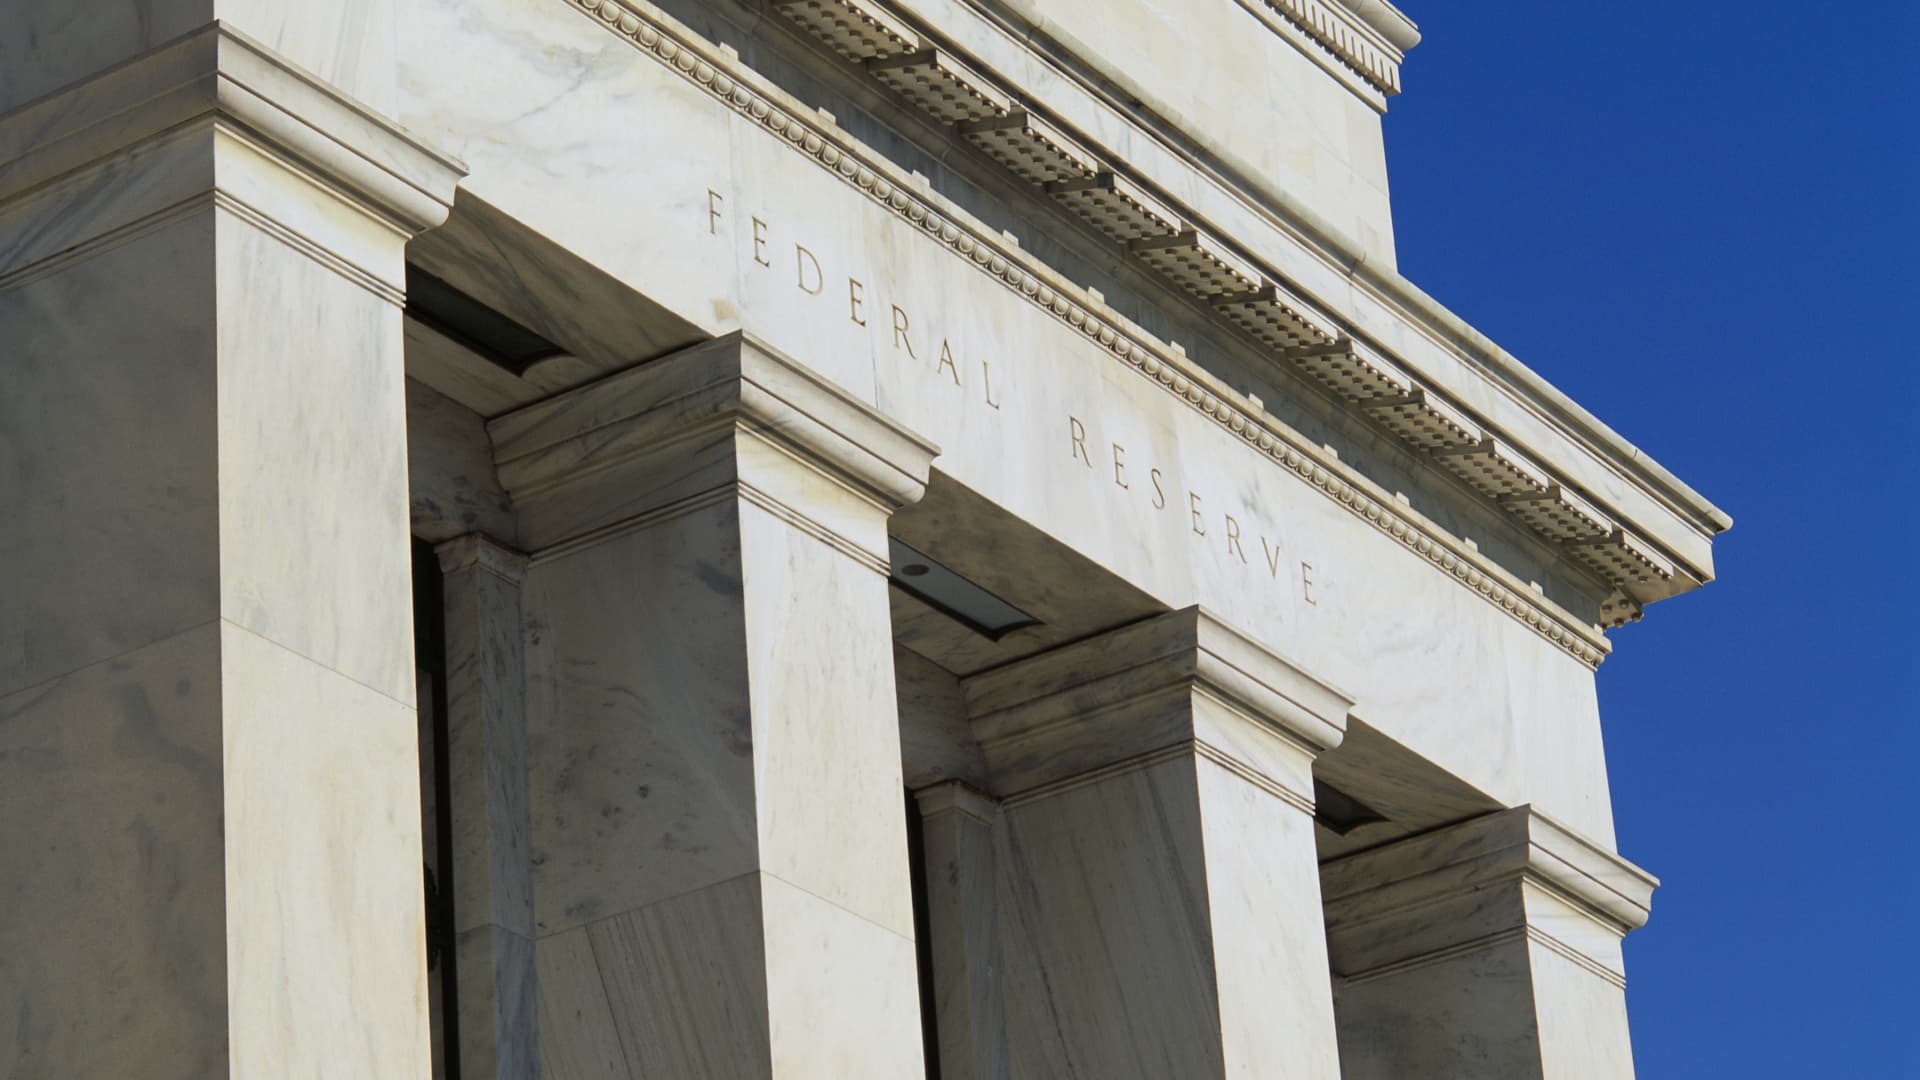 Fed, other central banks set joint liquidity operation